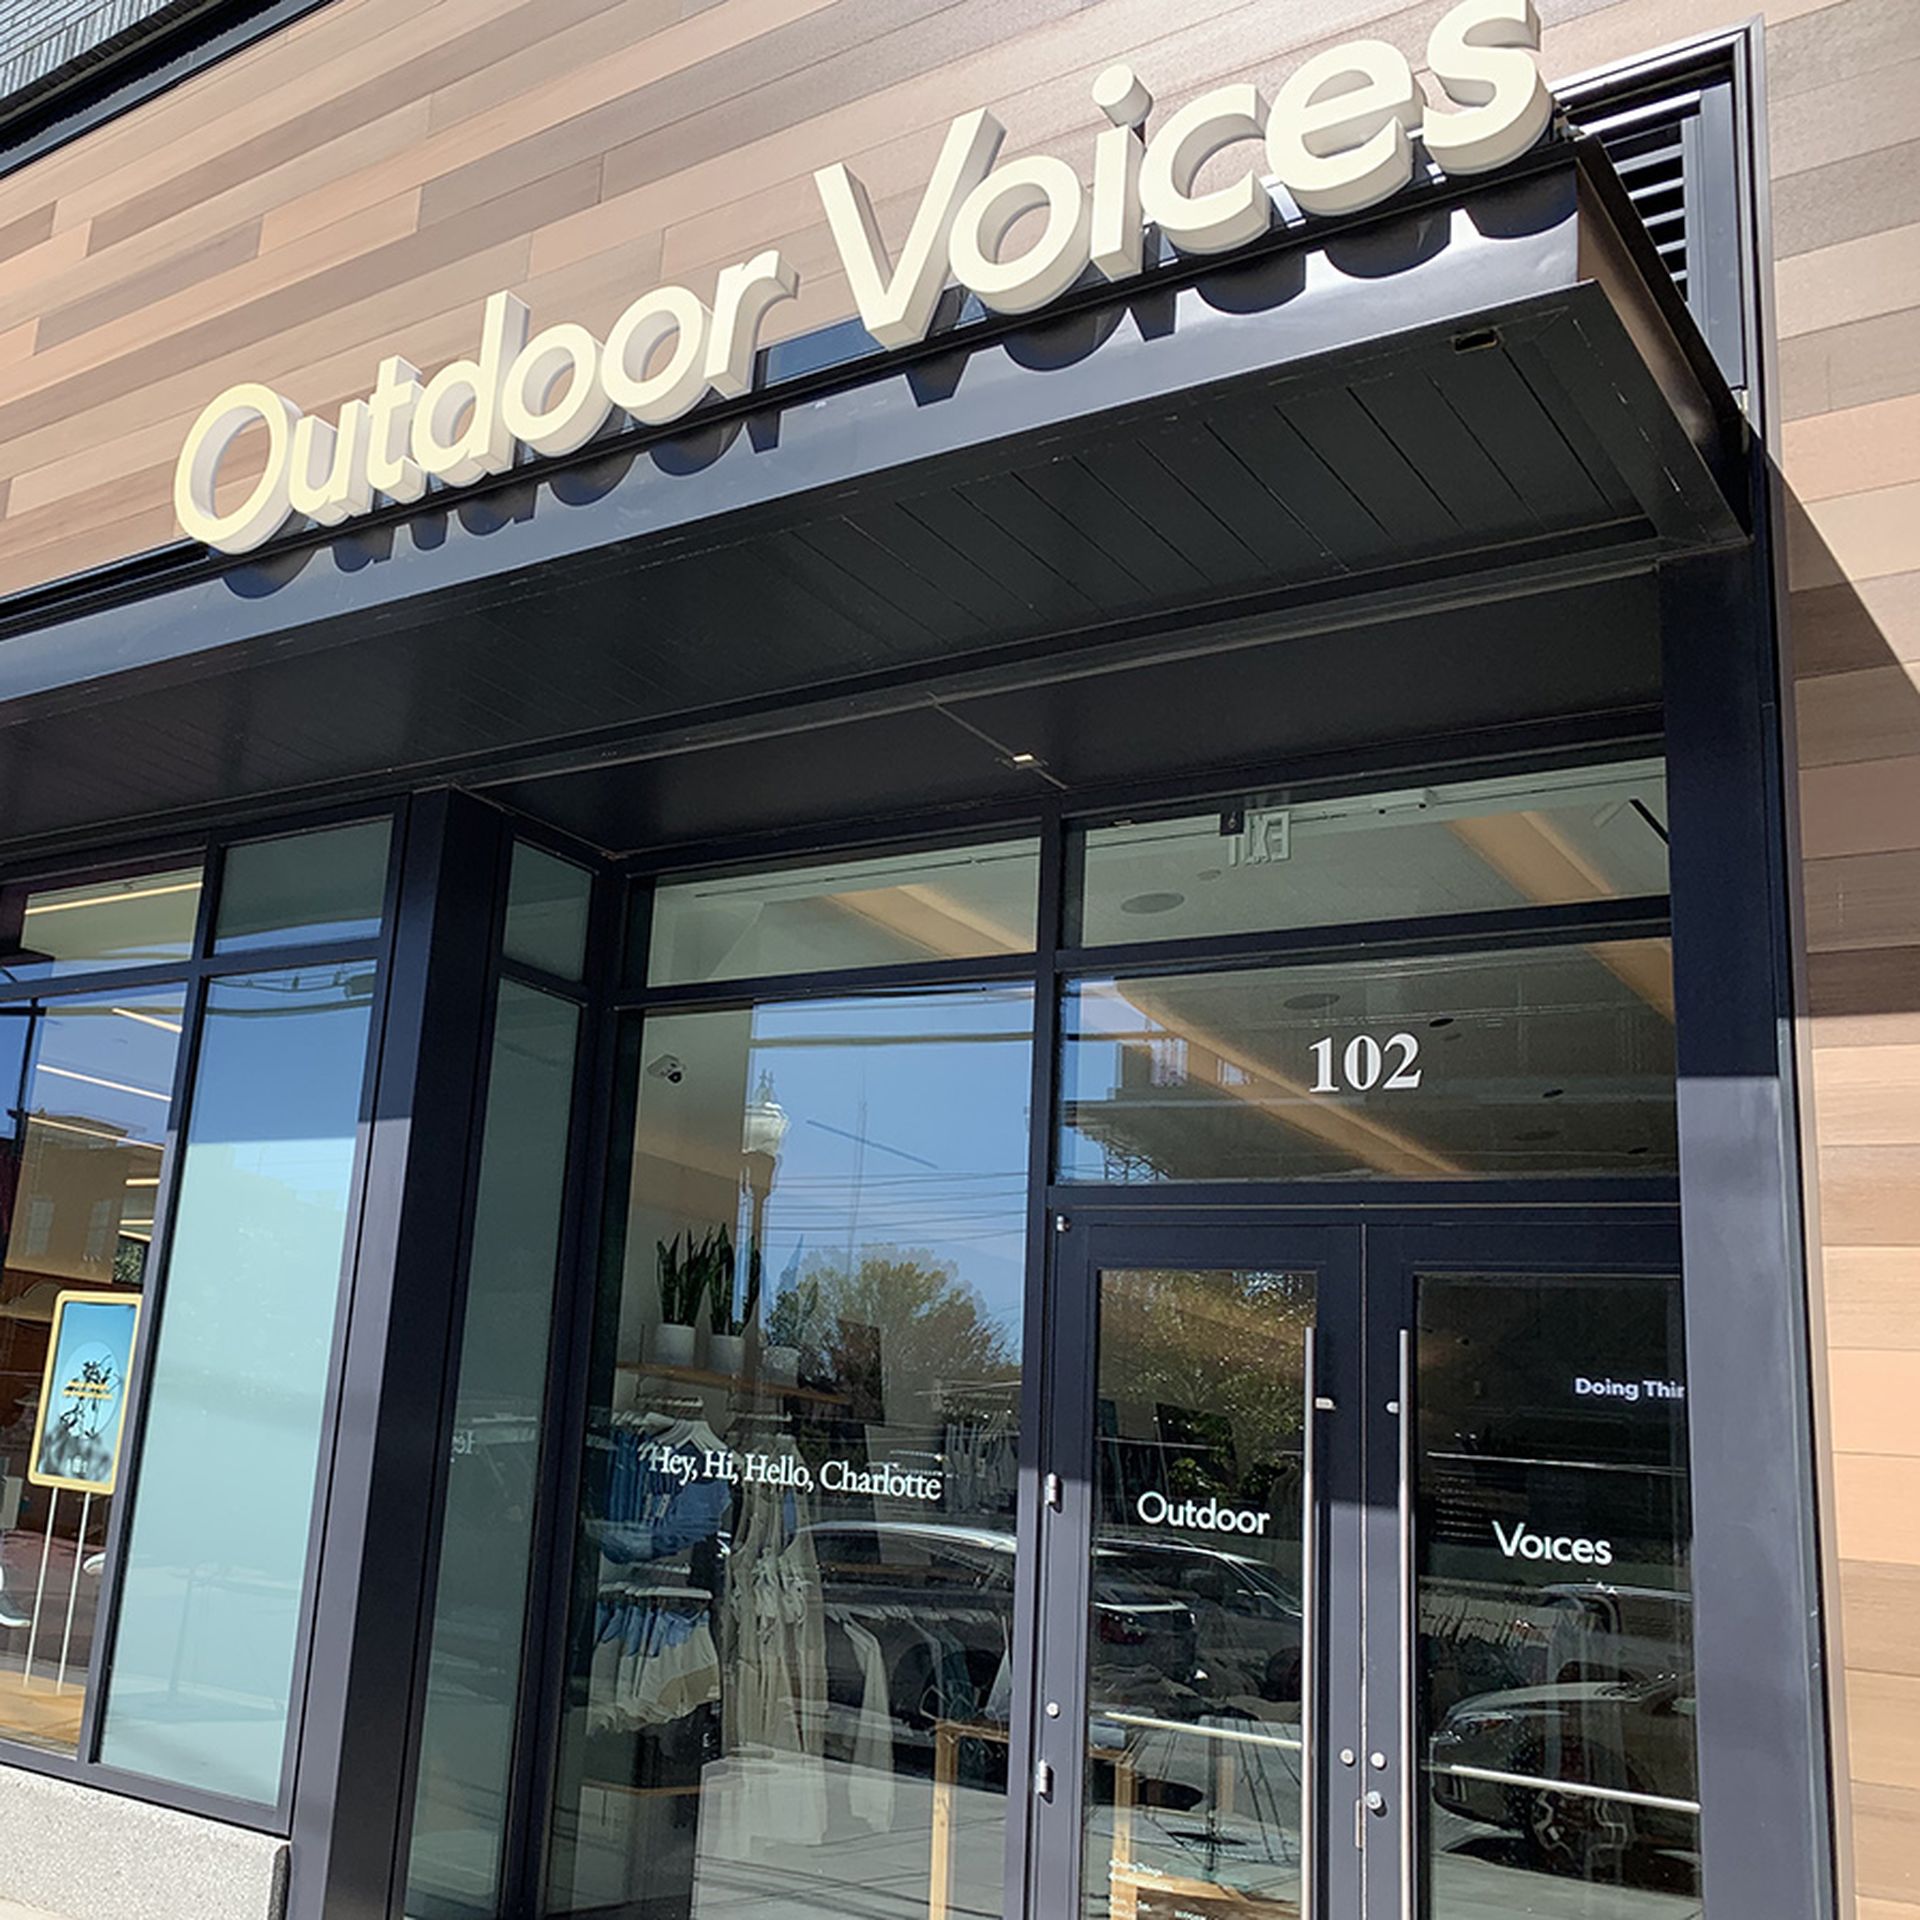 Outdoor Voices is now open in South End - Axios Charlotte